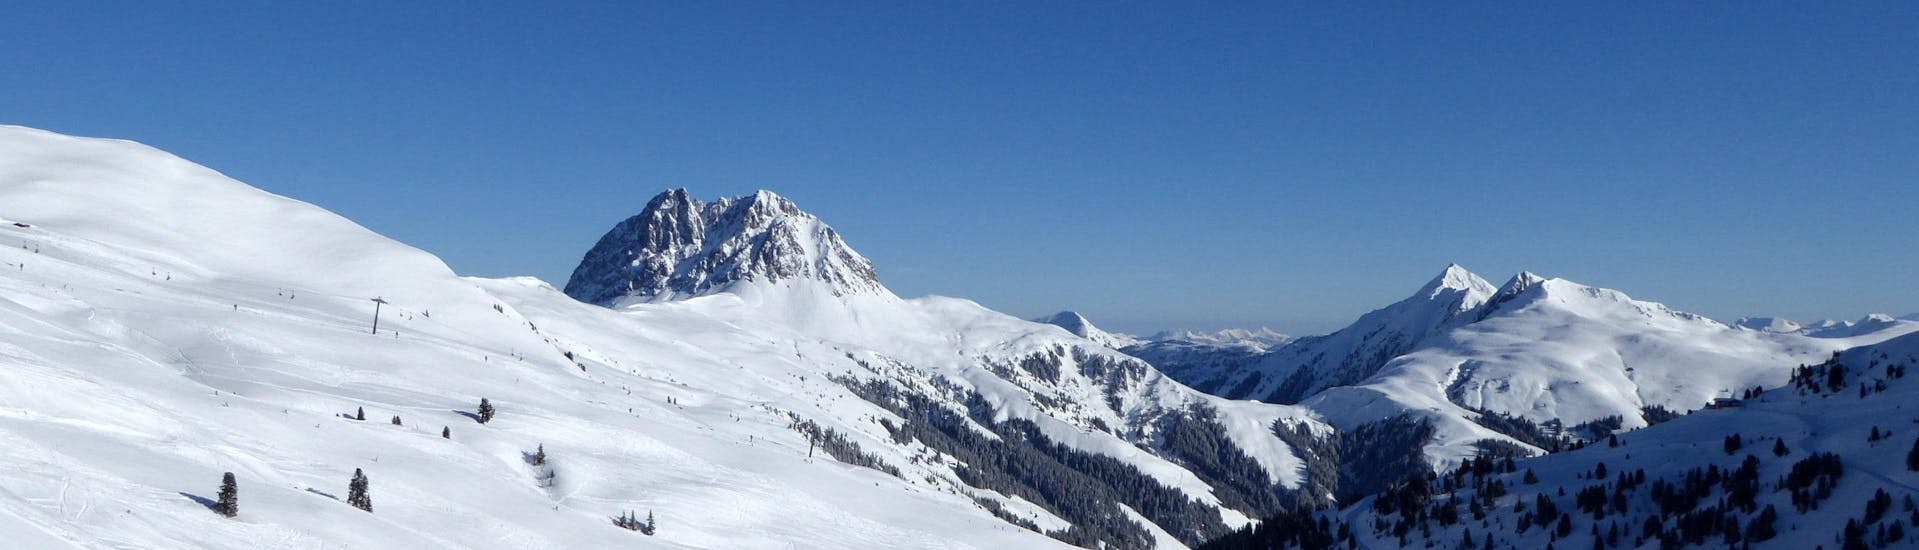 View over the sunny mountain landscape while learning to ski with the ski schools in the Wildkogel Arena.